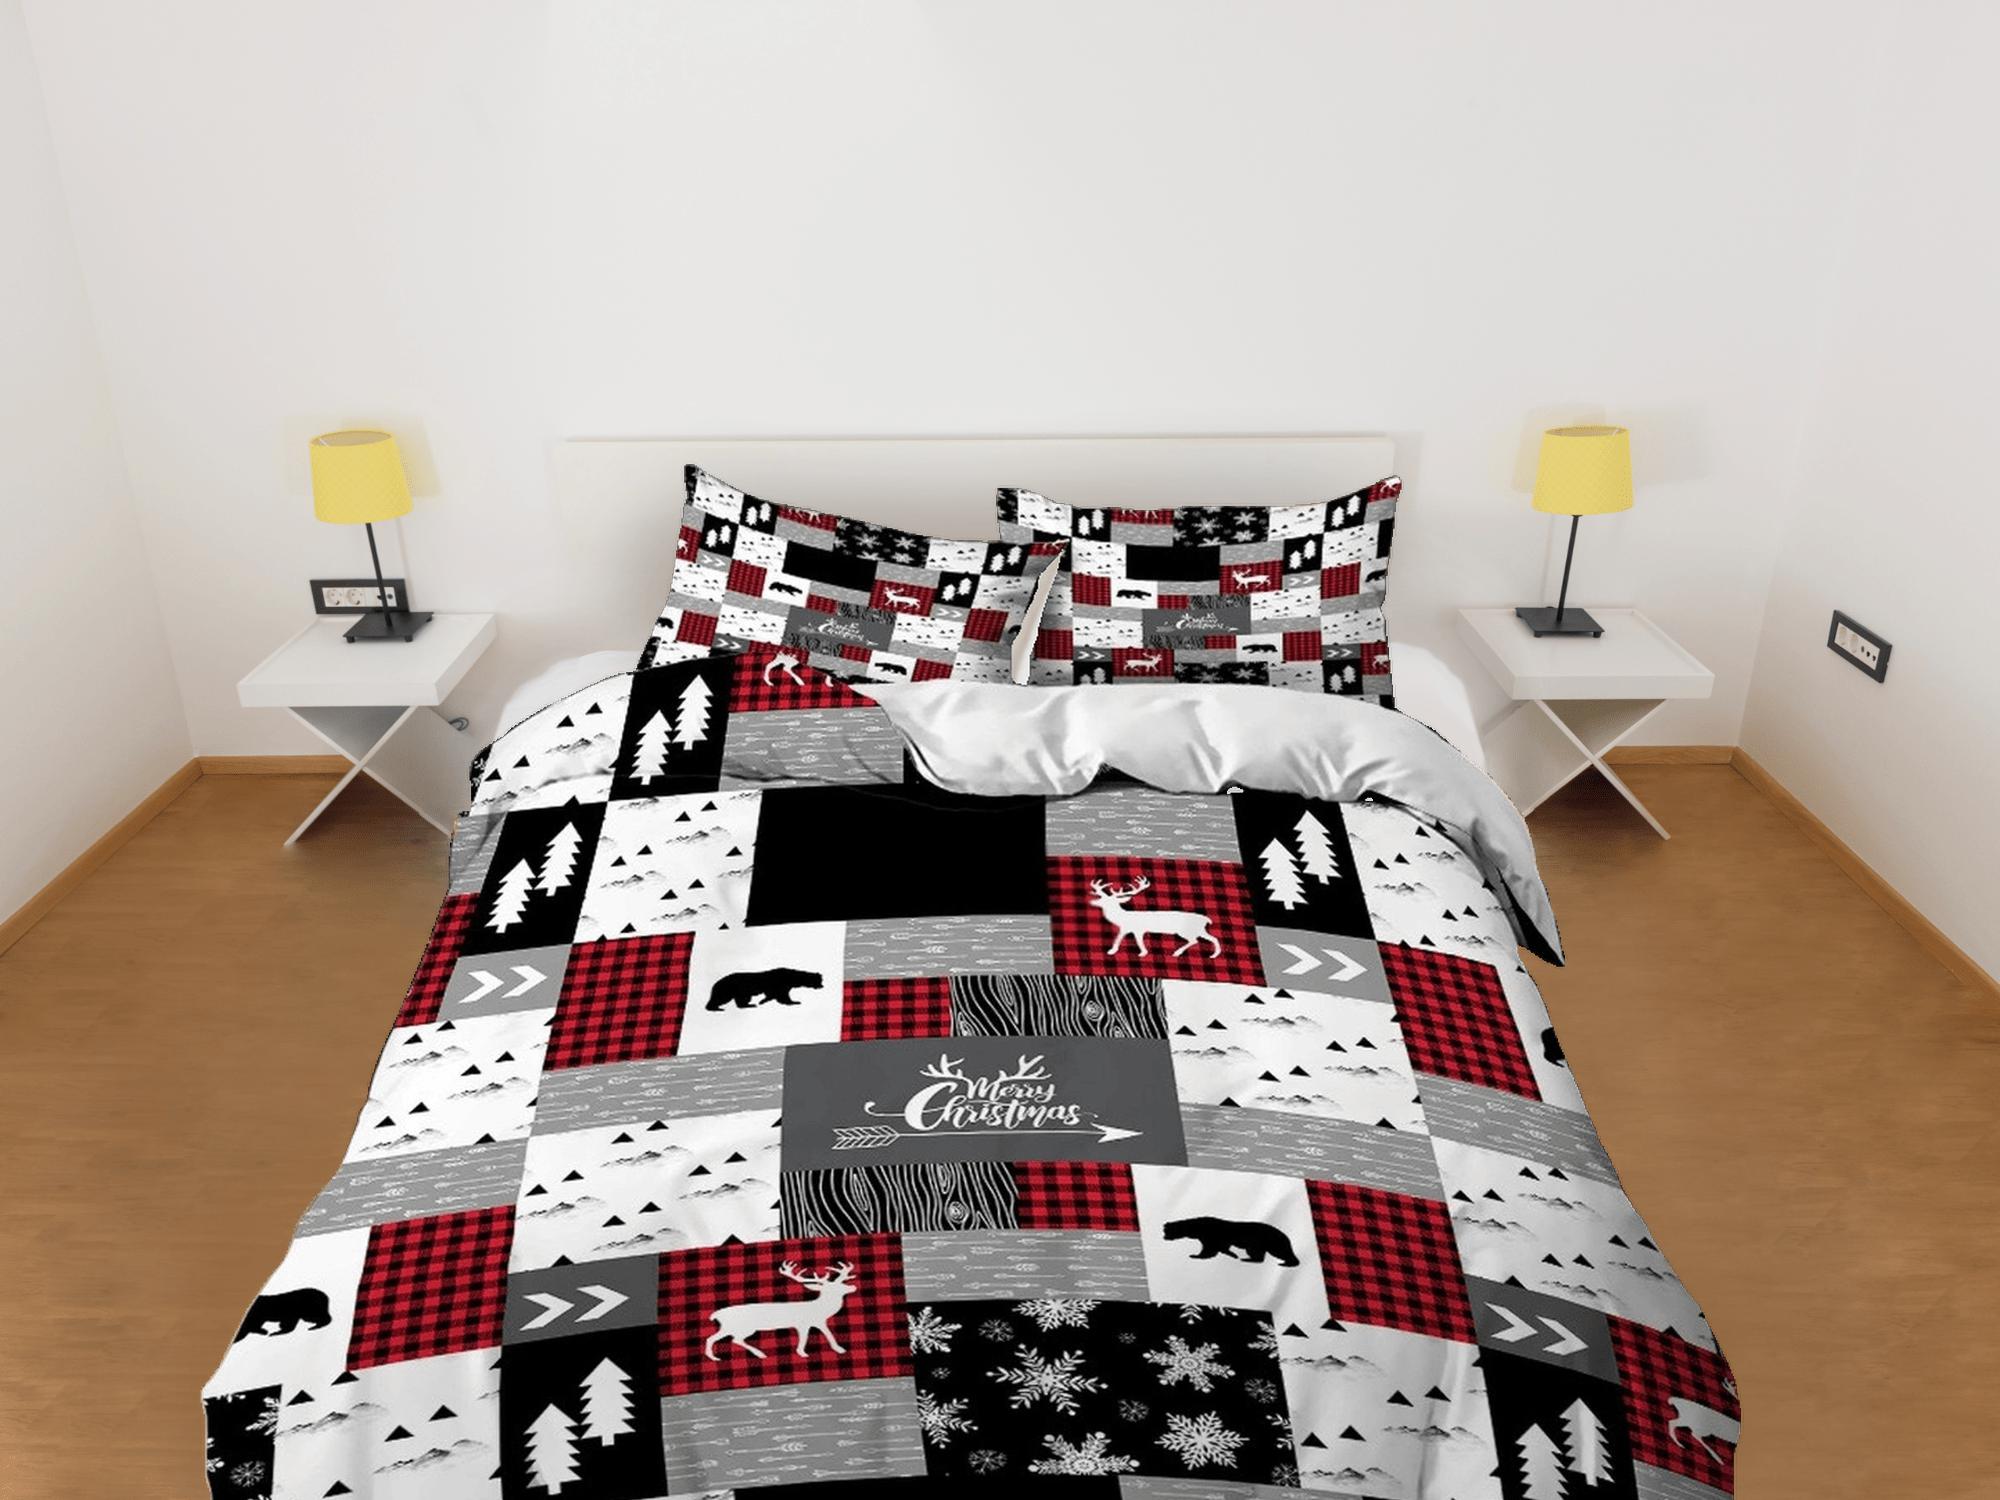 daintyduvet Patchwork Christmas bedding & pillowcase holiday gift duvet cover king queen full twin toddler bedding baby Christmas farmhouse decor